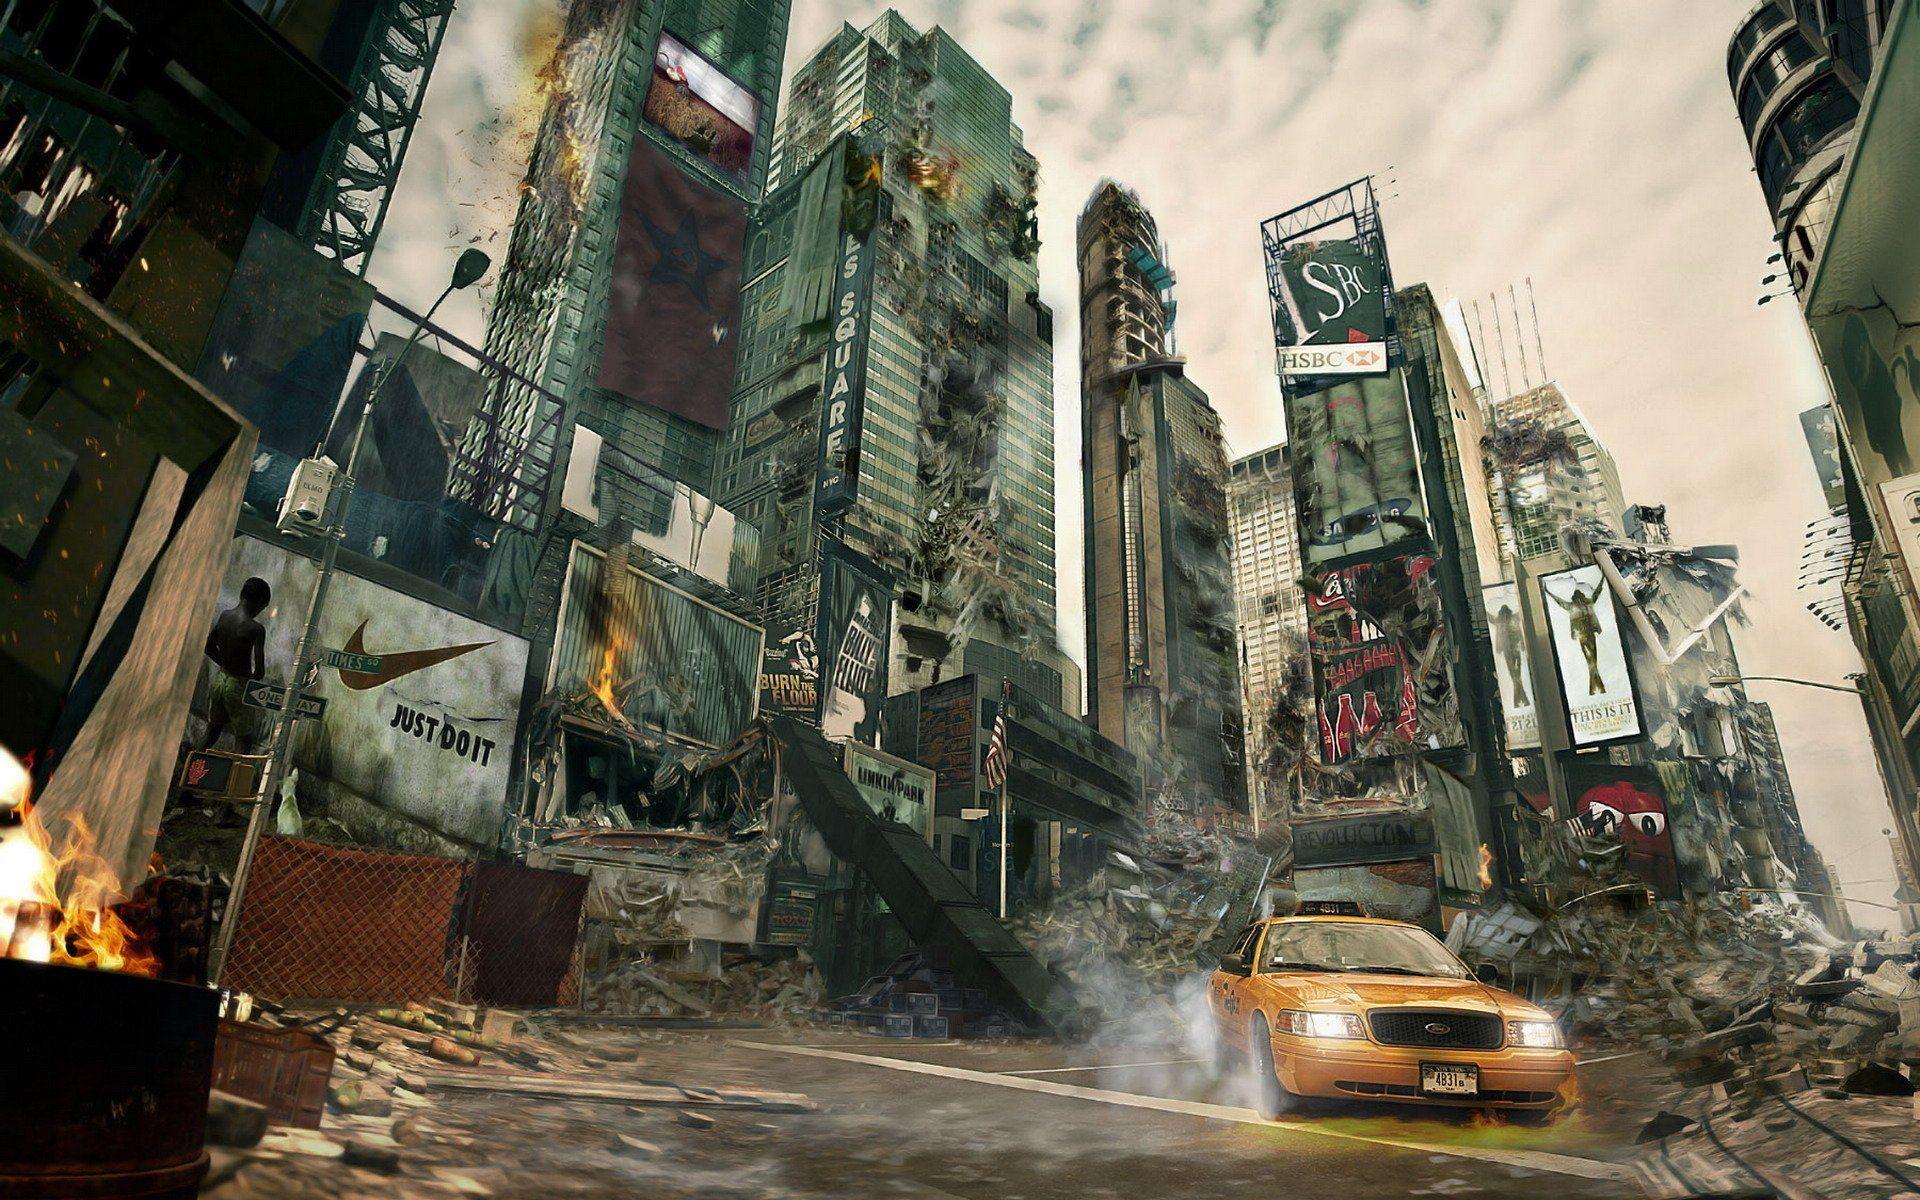 Destroyed City Wallpaper Free Destroyed City Background